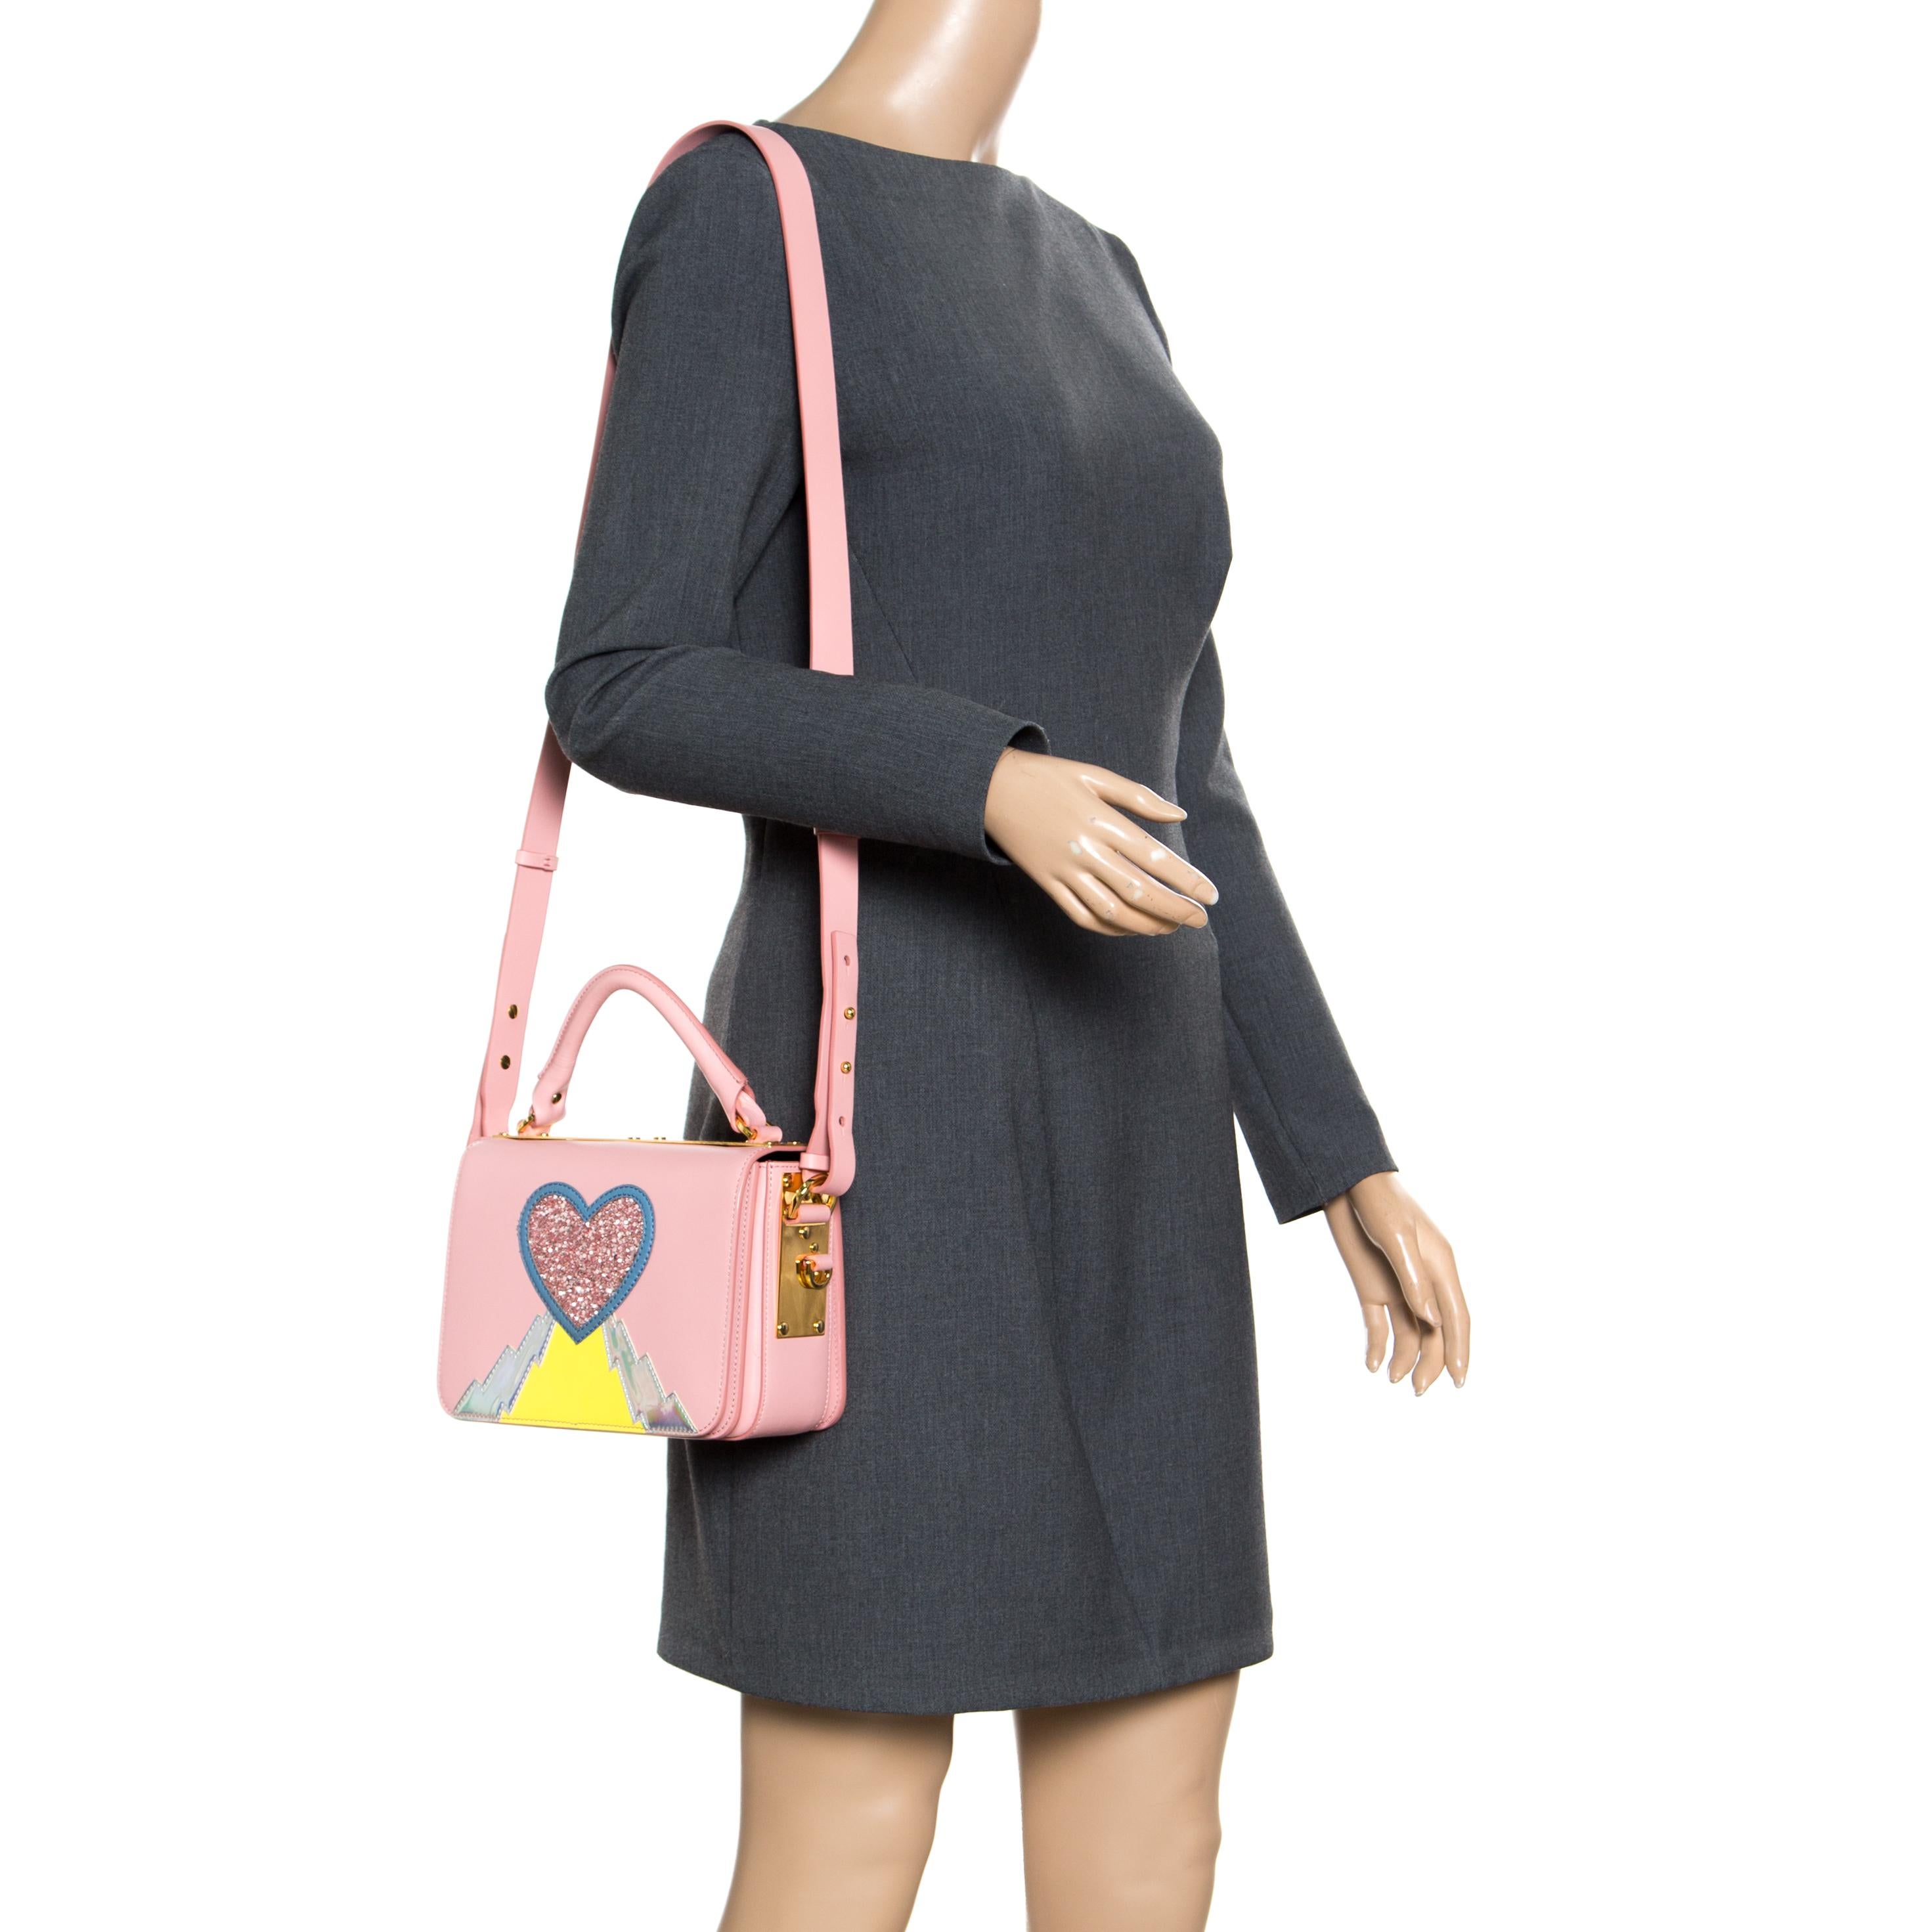 Handbags are more than just instruments to carry one's essentials. They tell a woman's sense of style and the better the bag, the more confidence she gets when she holds it. Sophie Hulme brings you one such fabulous bag meticulously made from pink